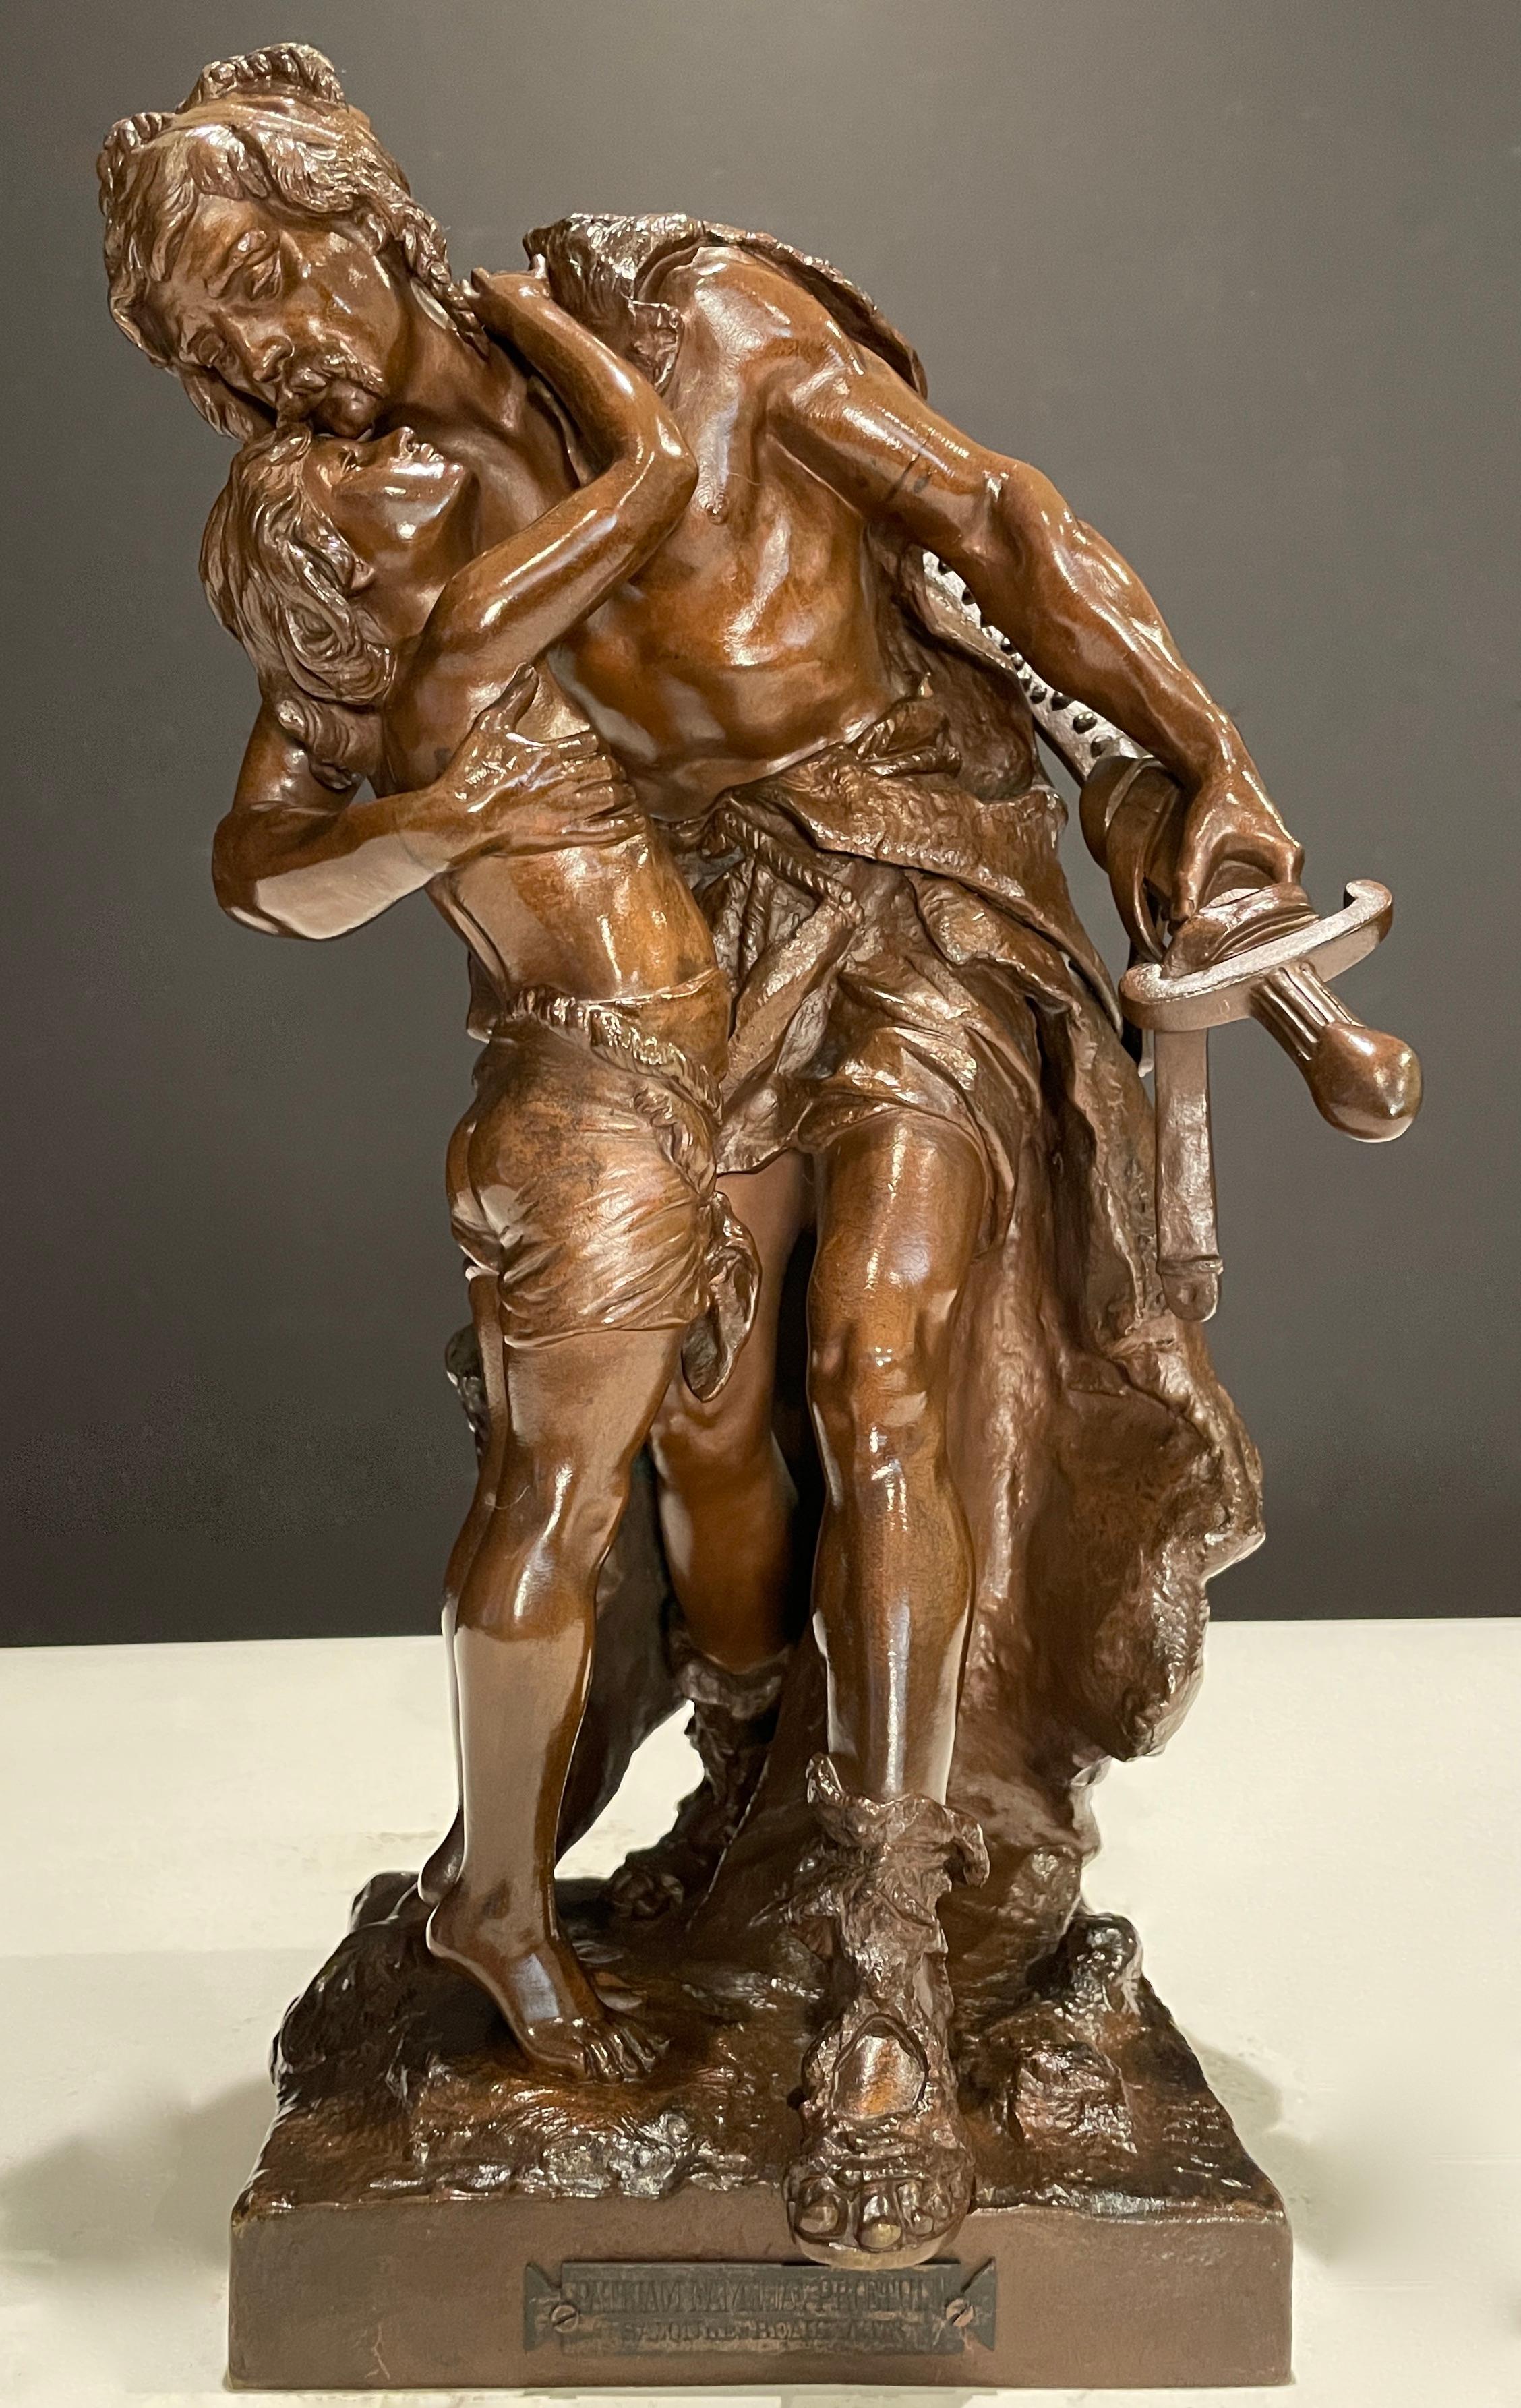 Henri Honore Plé (1853 - 1922). This beautiful original 19th century French sculpture depicts a moment between father and son. Fine quality patinated bronze, in the naturalistic style that is typical of Plé's work. The father is dressed in furs and